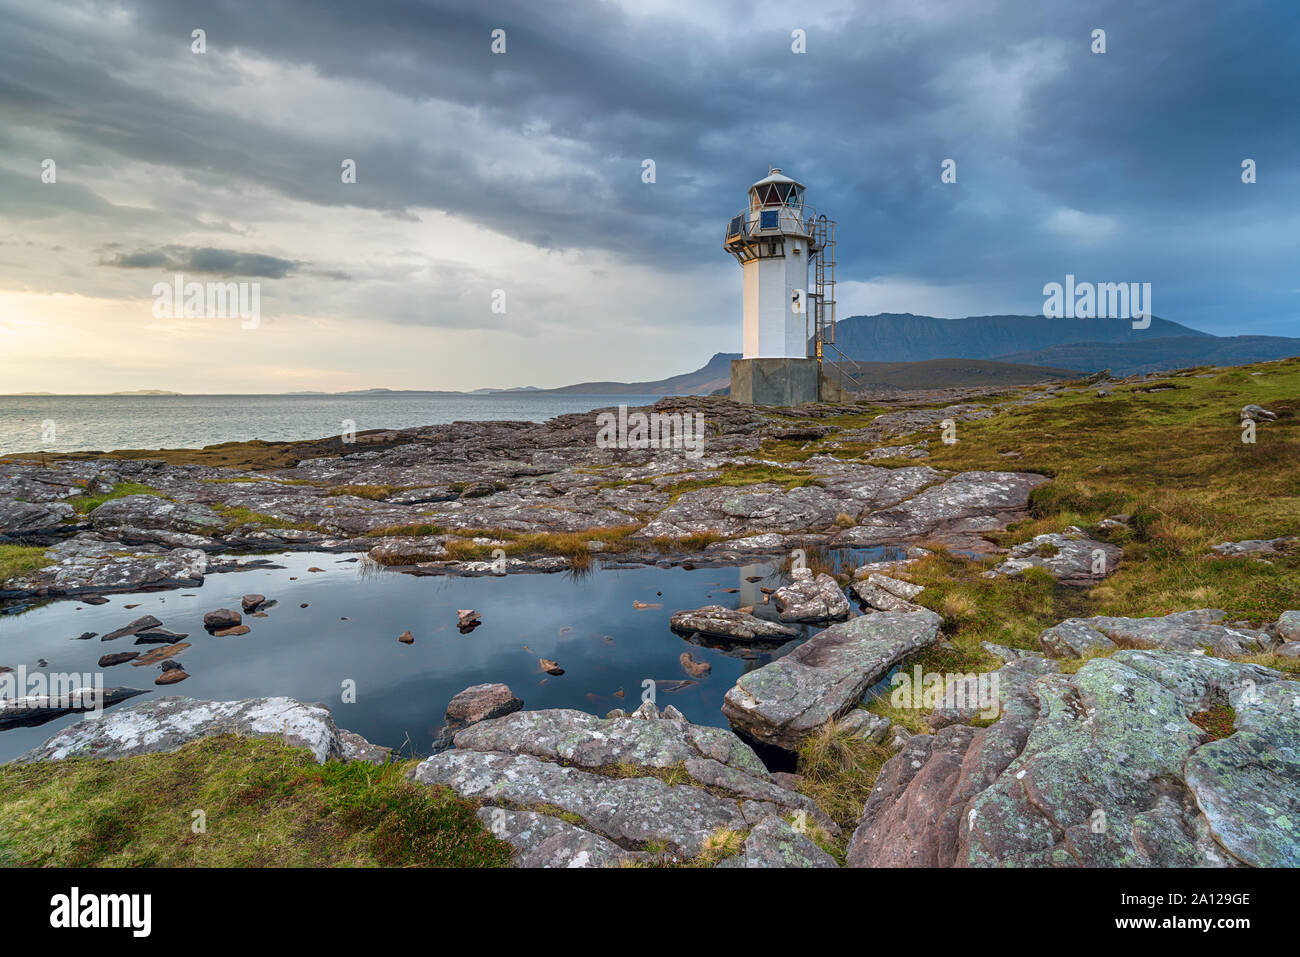 Stormy skies over Rhue lighthouse near Ullapool in the Highlands of Scotland Stock Photo